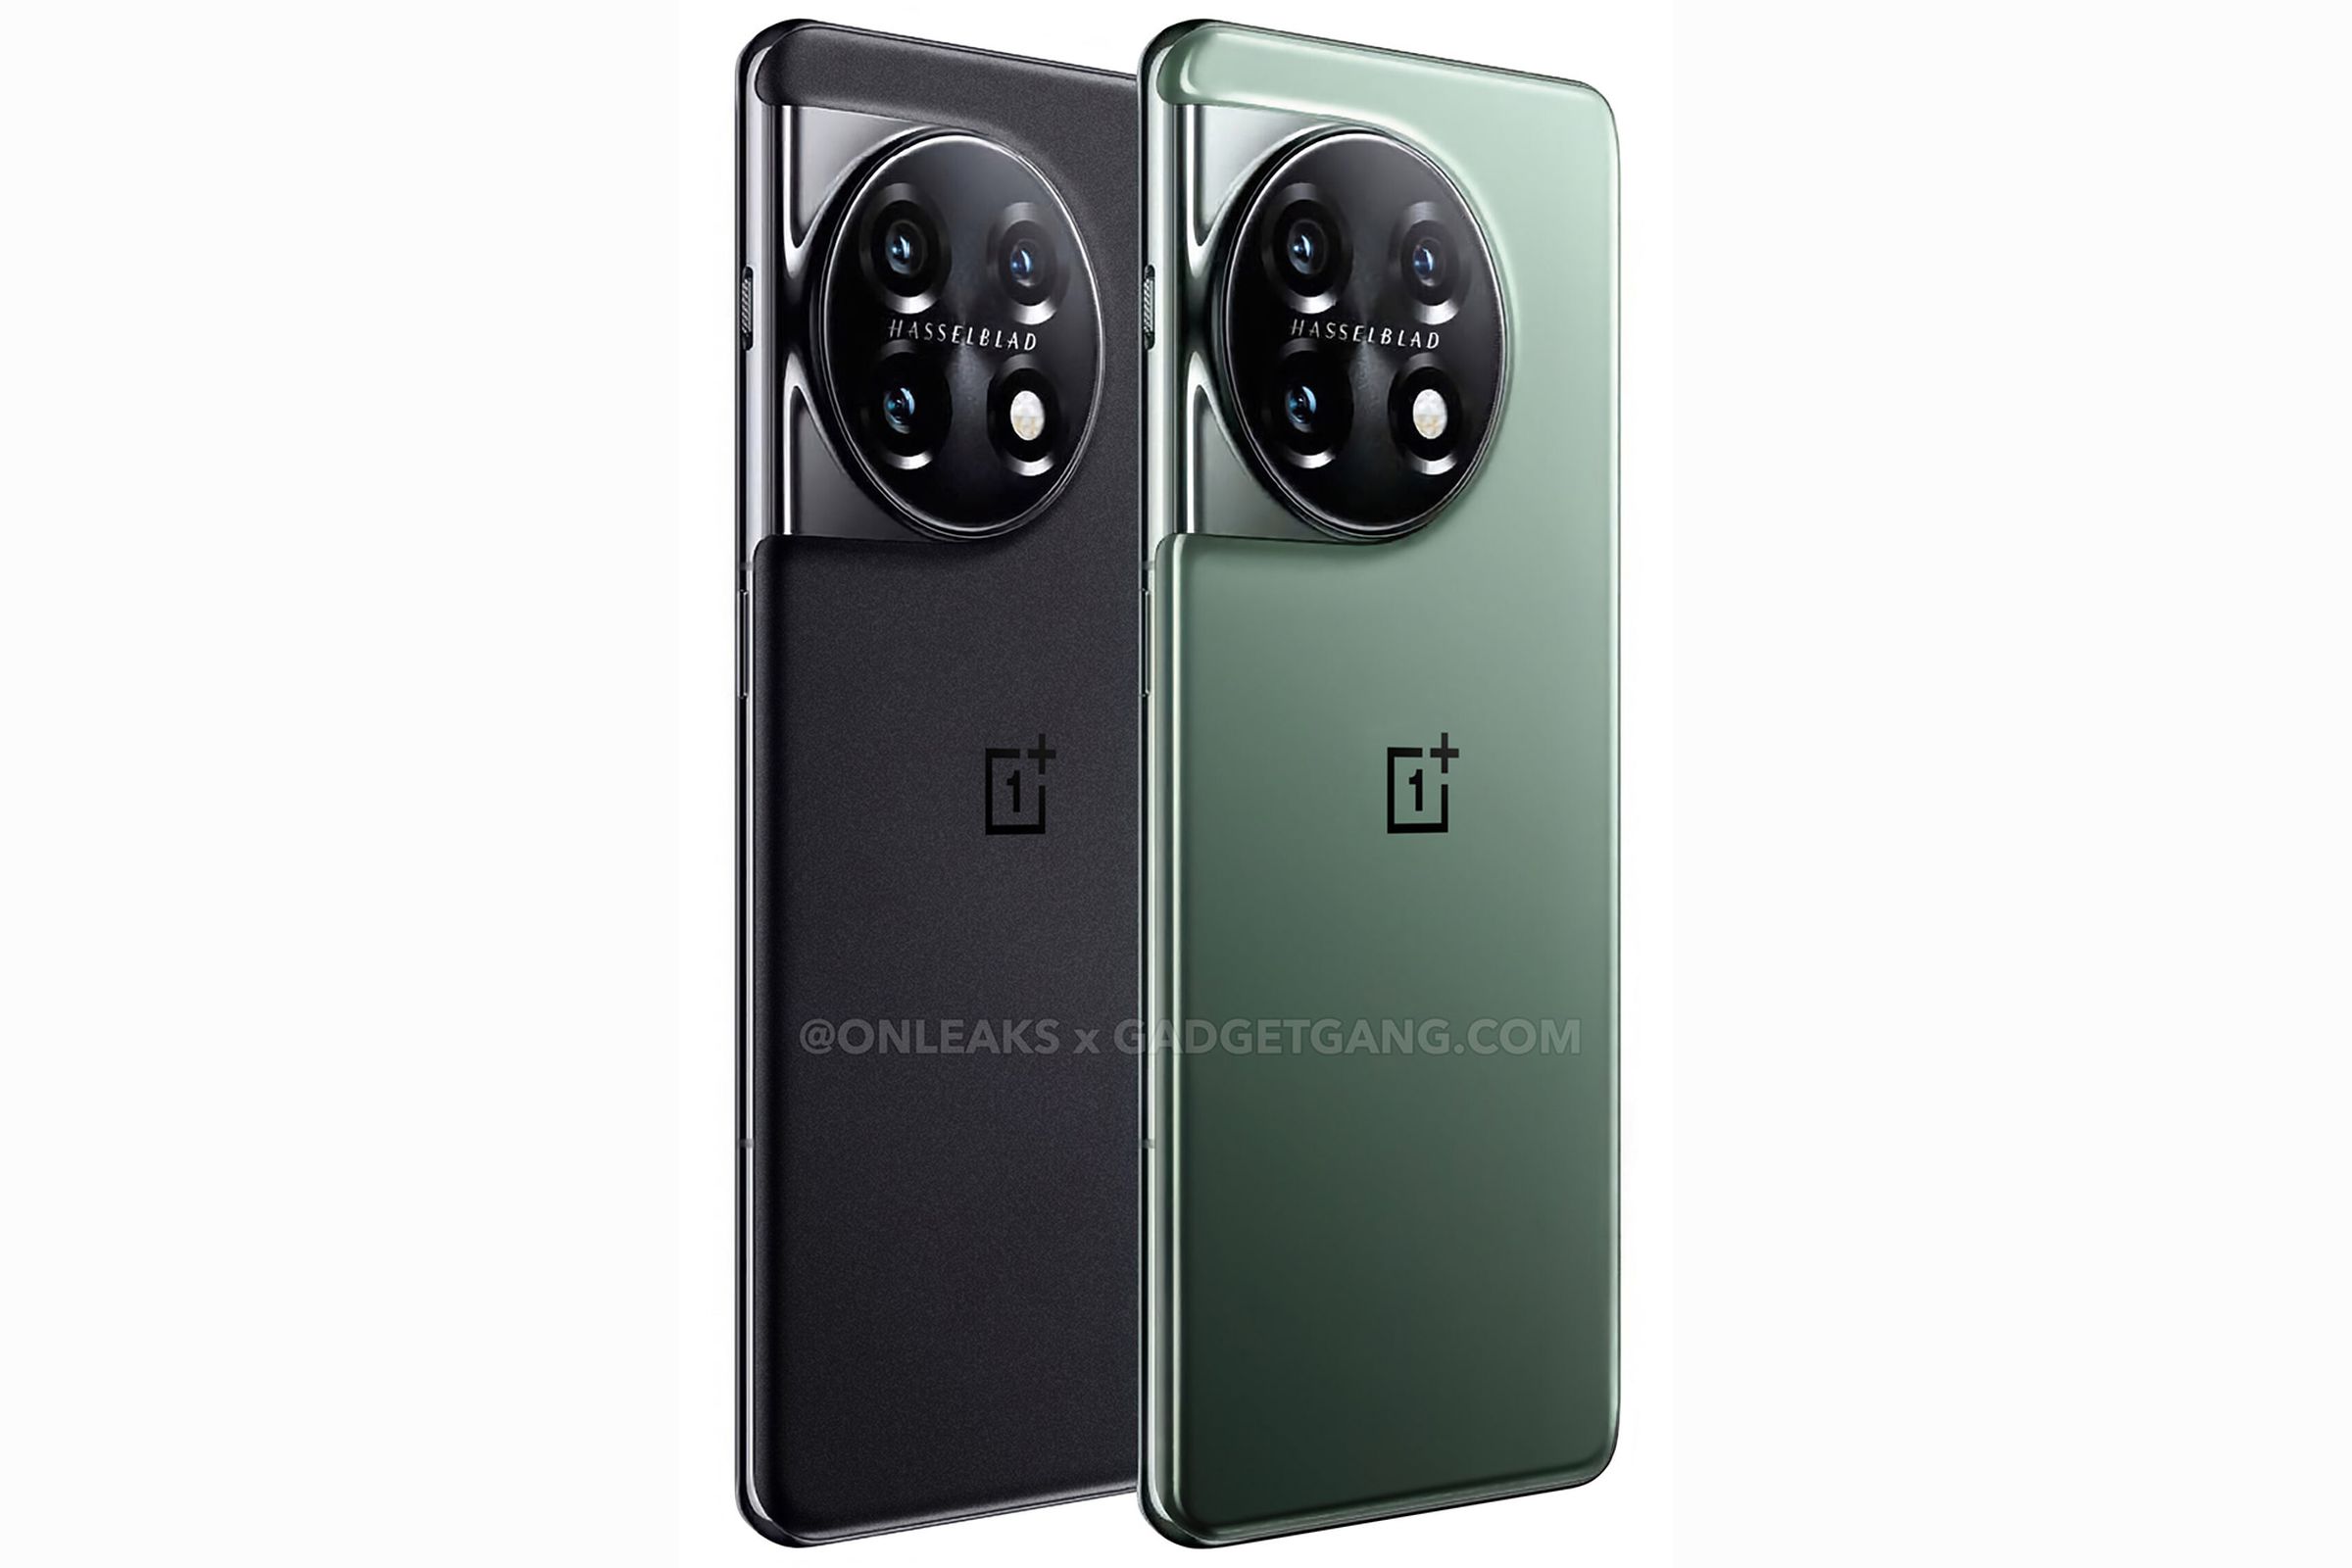 An alleged render of the unannounced OnePlus 11